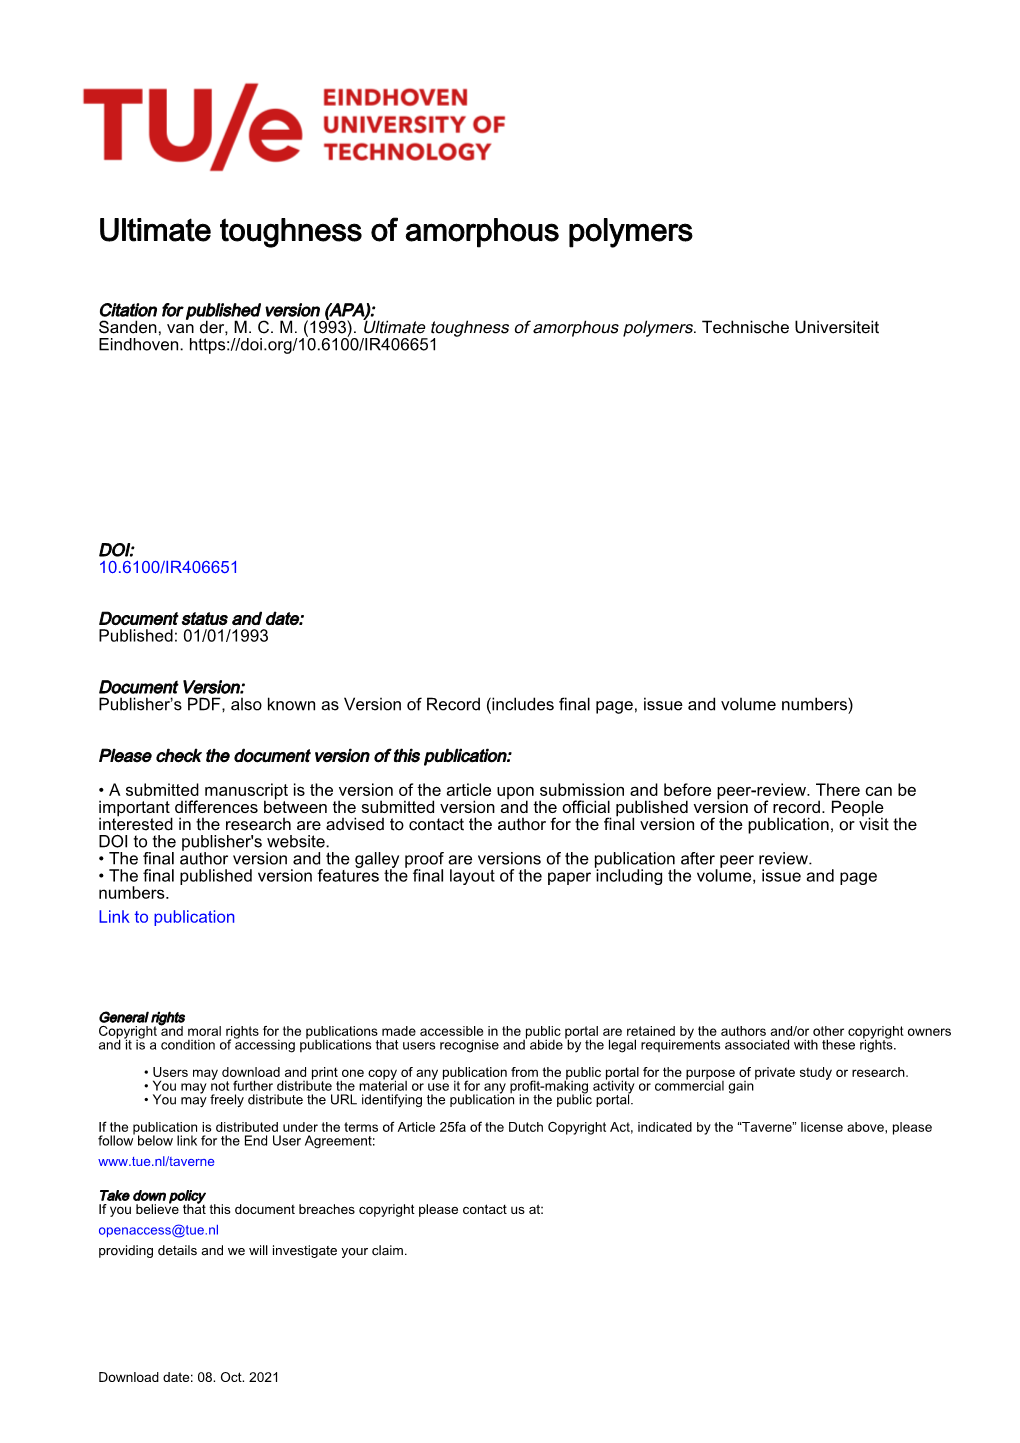 Ultimate Toughness of Amorphous Polymers